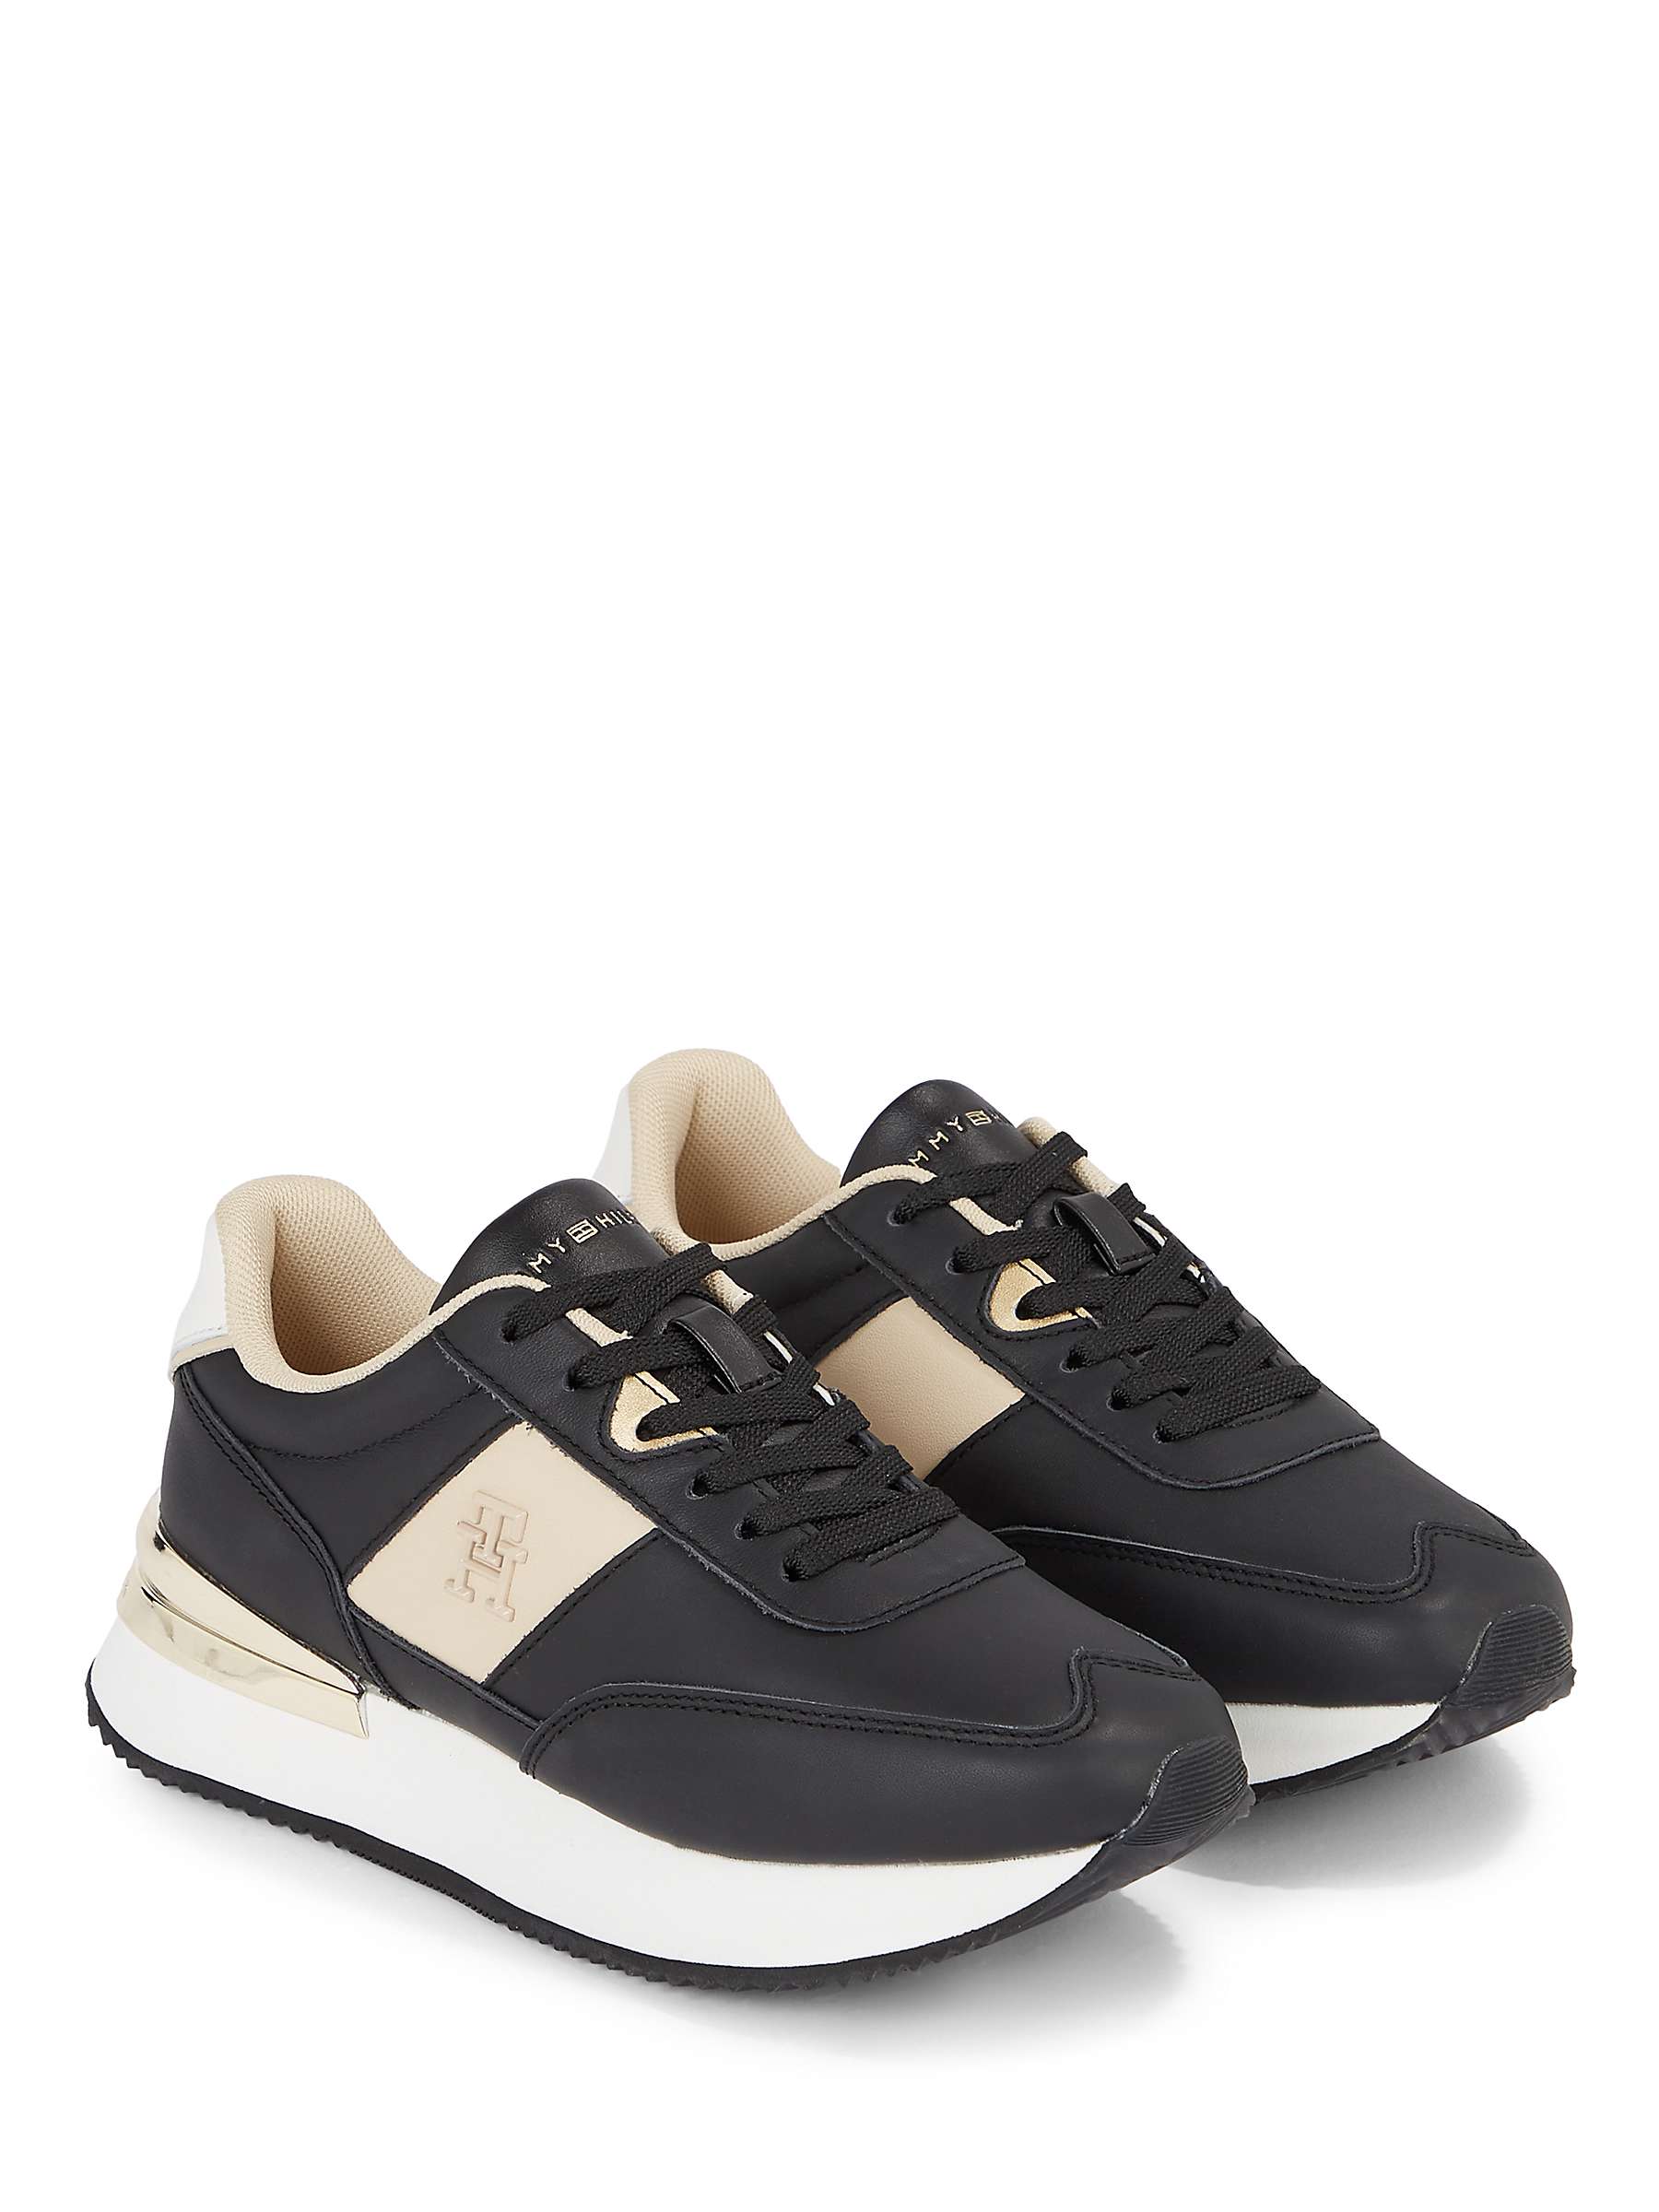 Buy Tommy Hilfiger TH Elevated Feminine Trainers Online at johnlewis.com